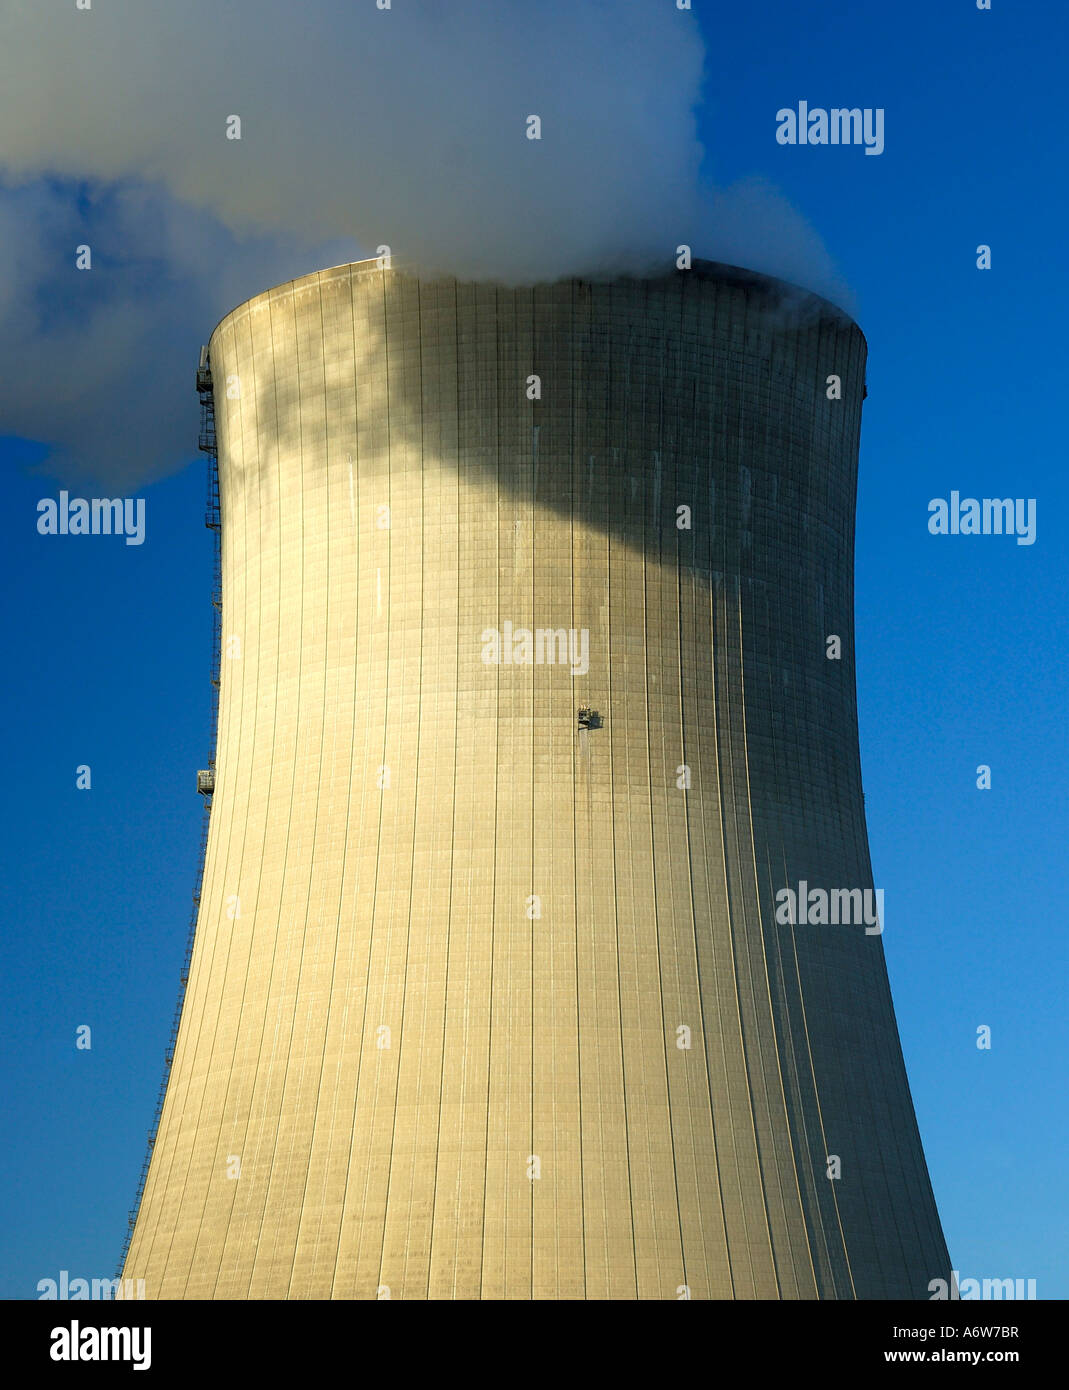 Cooling tower of a power plant Stock Photo